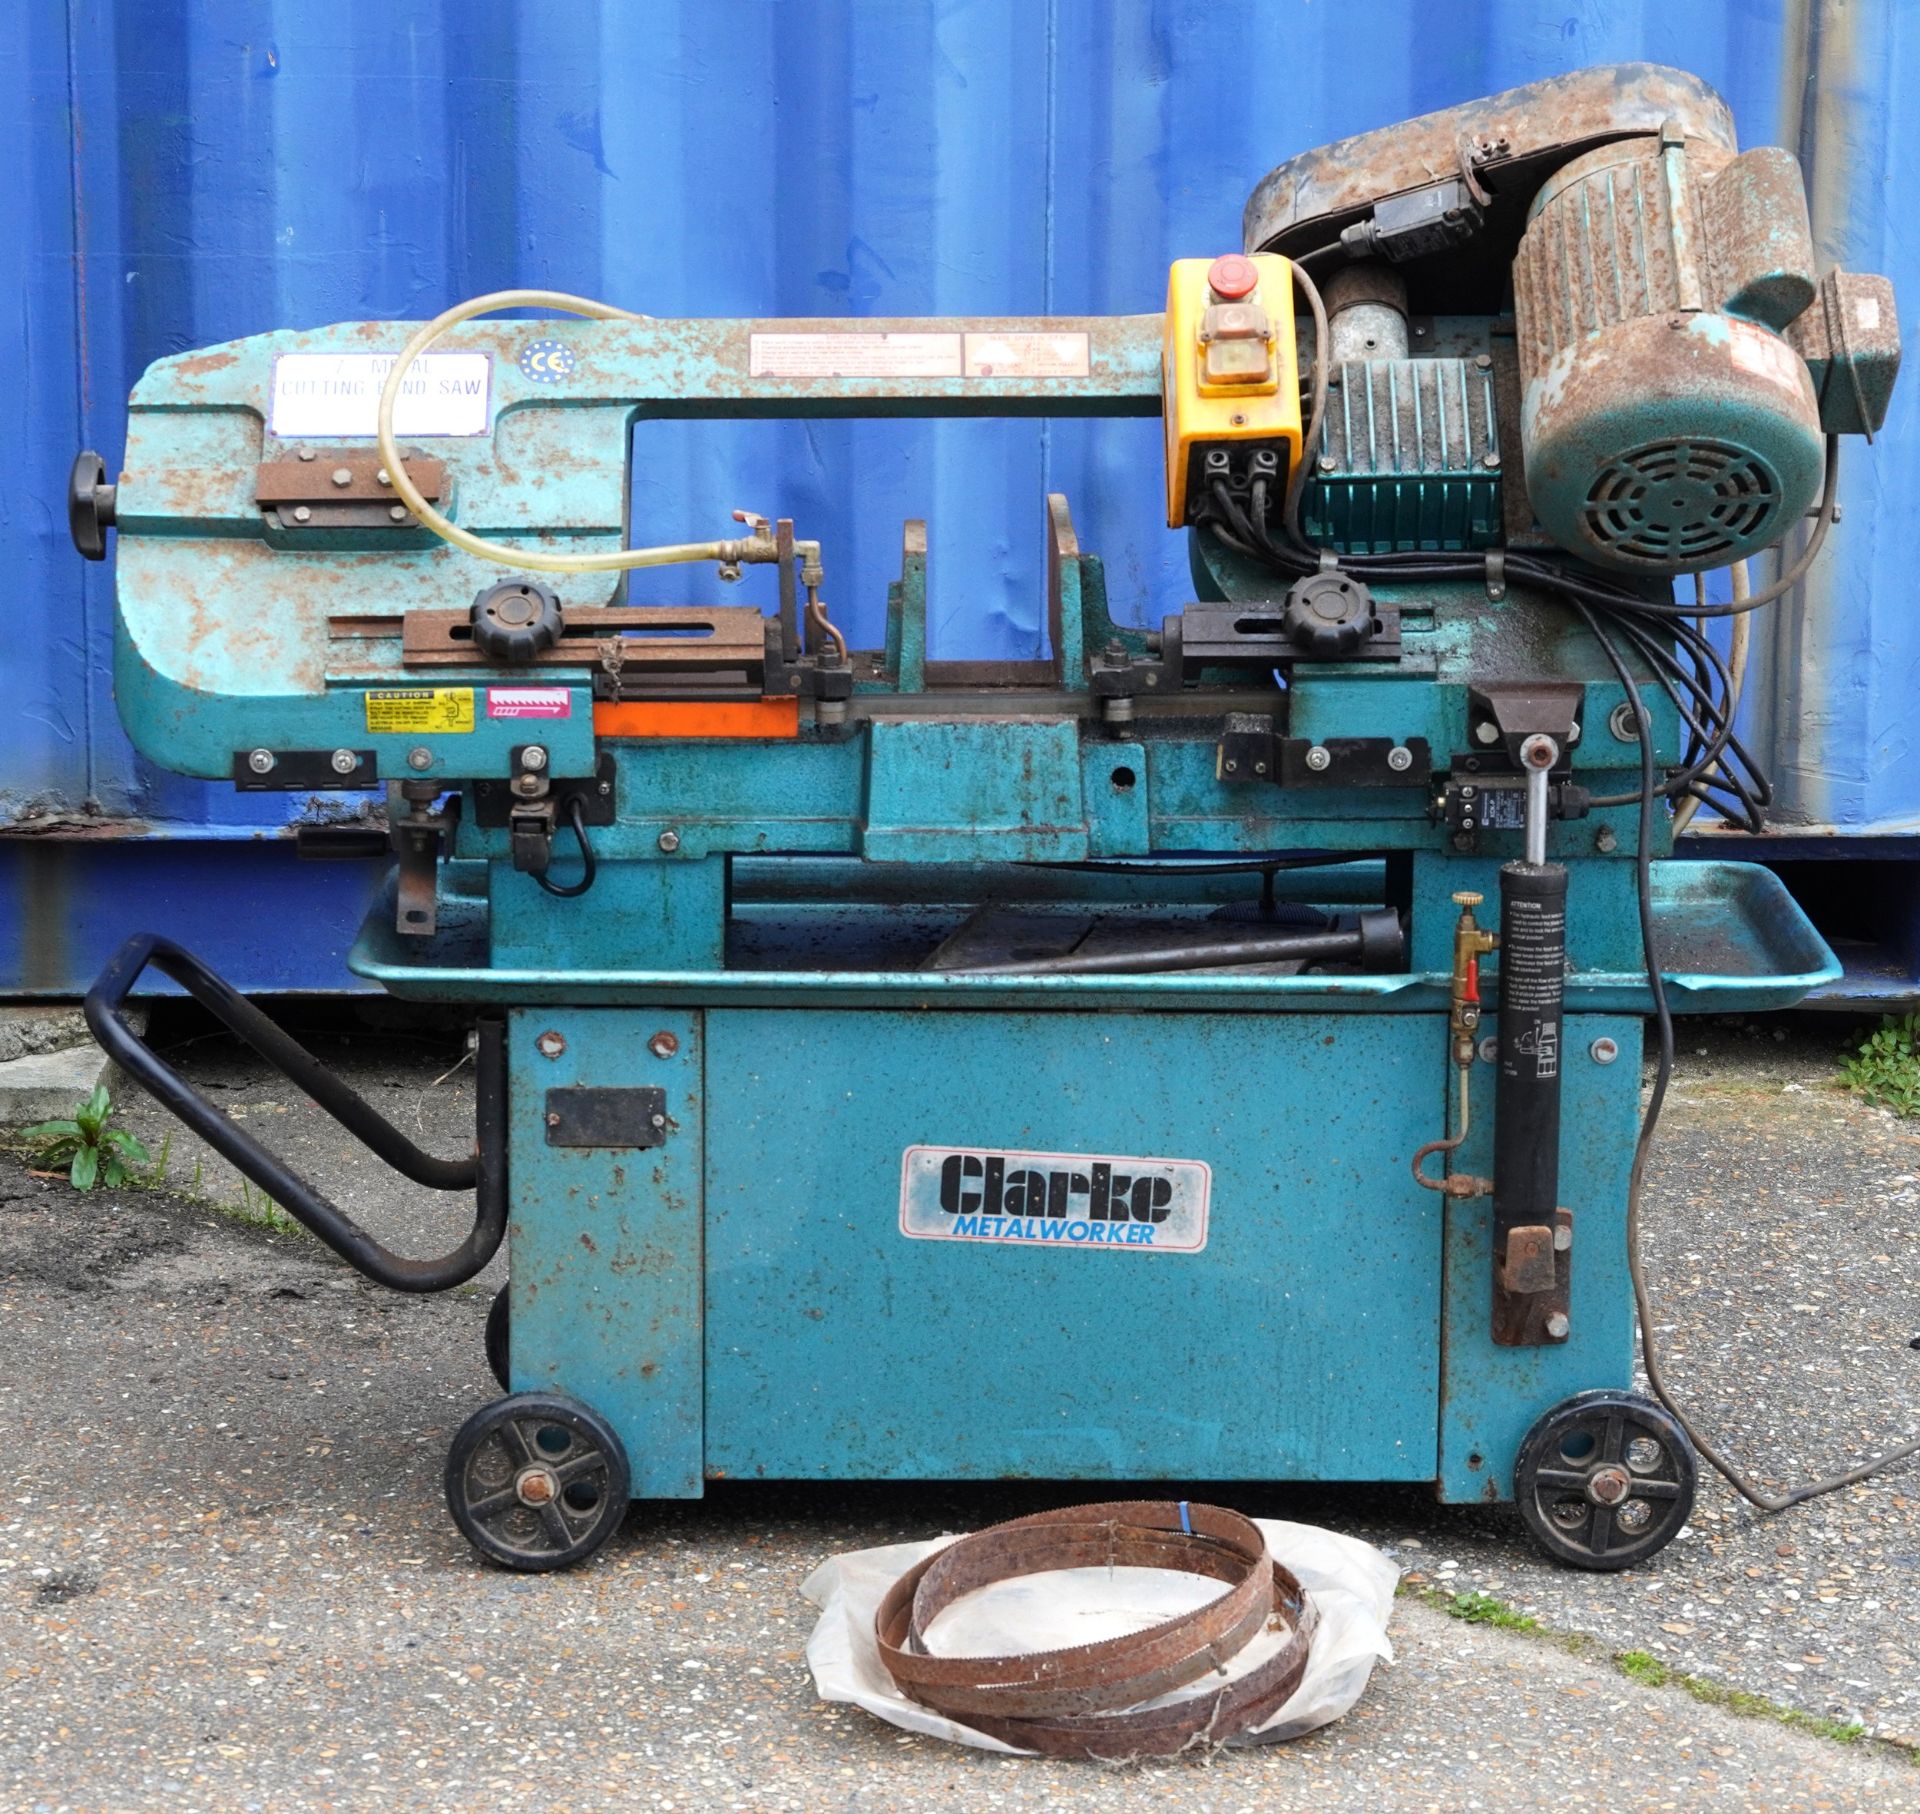 Clarke Seven inch metal cutting bandsaw, model CBS-7MH, serial number 9028160, 120cm wide - Image 2 of 3